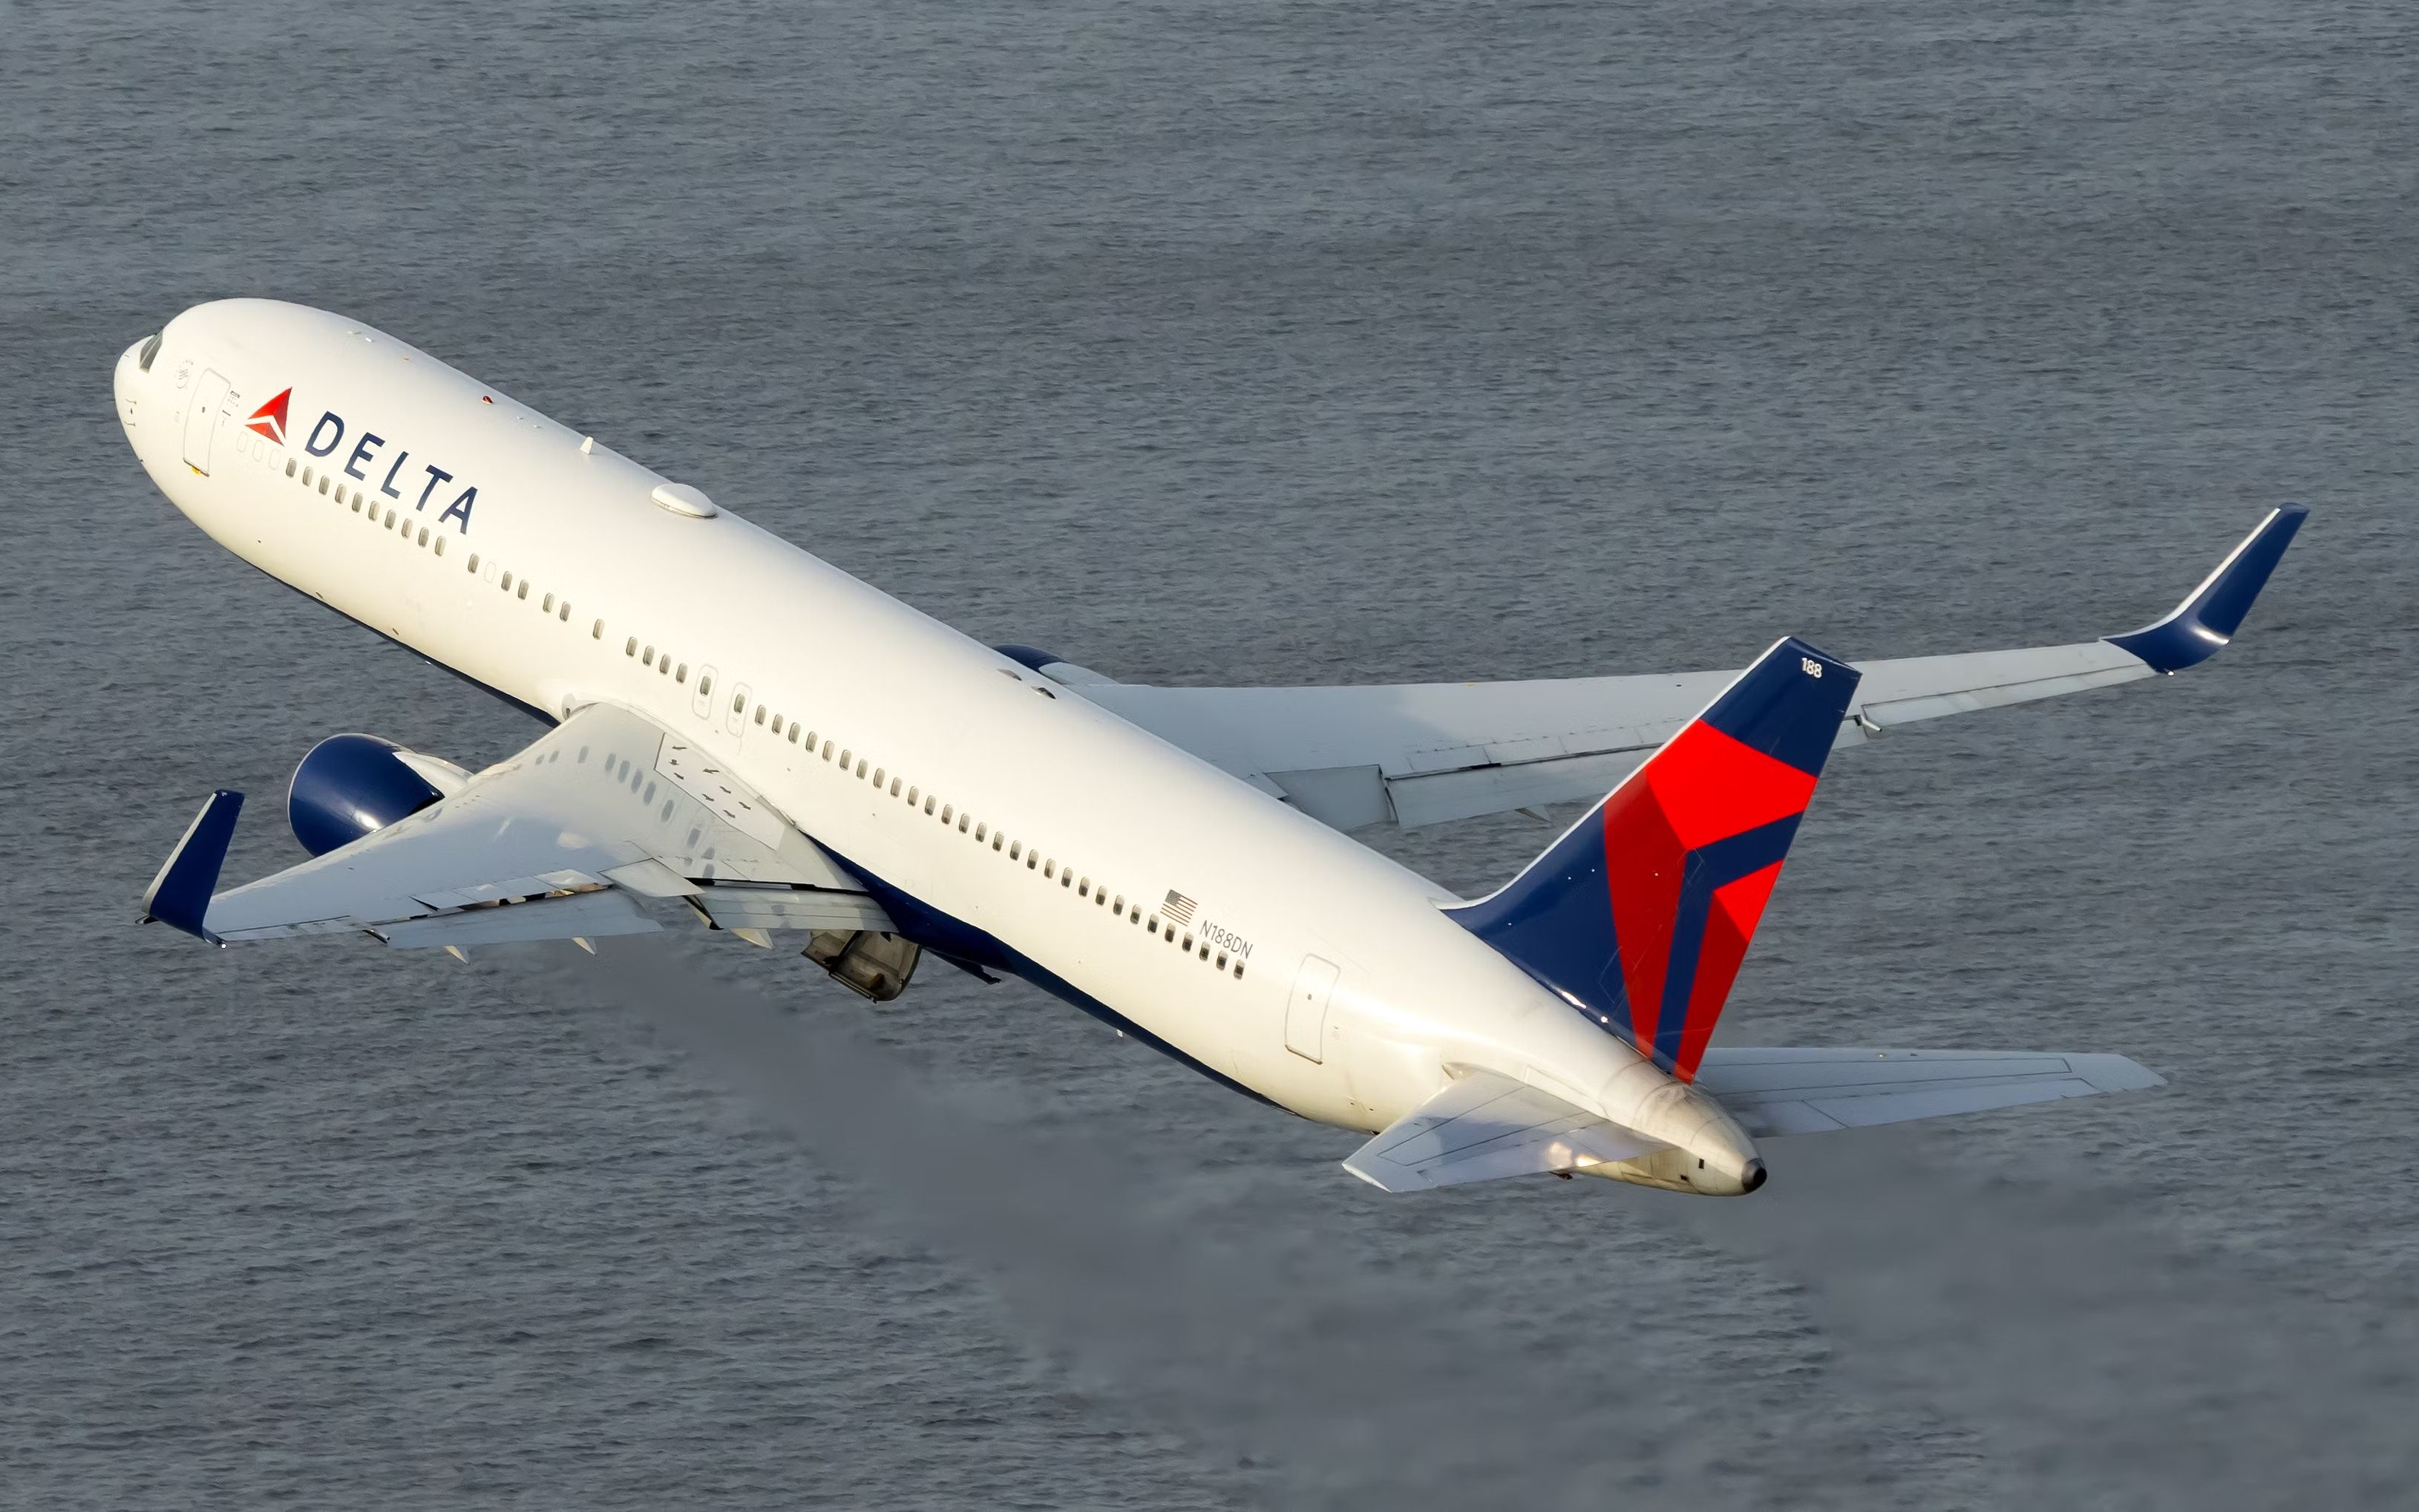 A Delta Air Lines Boeing 767-300(ER) flying over water.